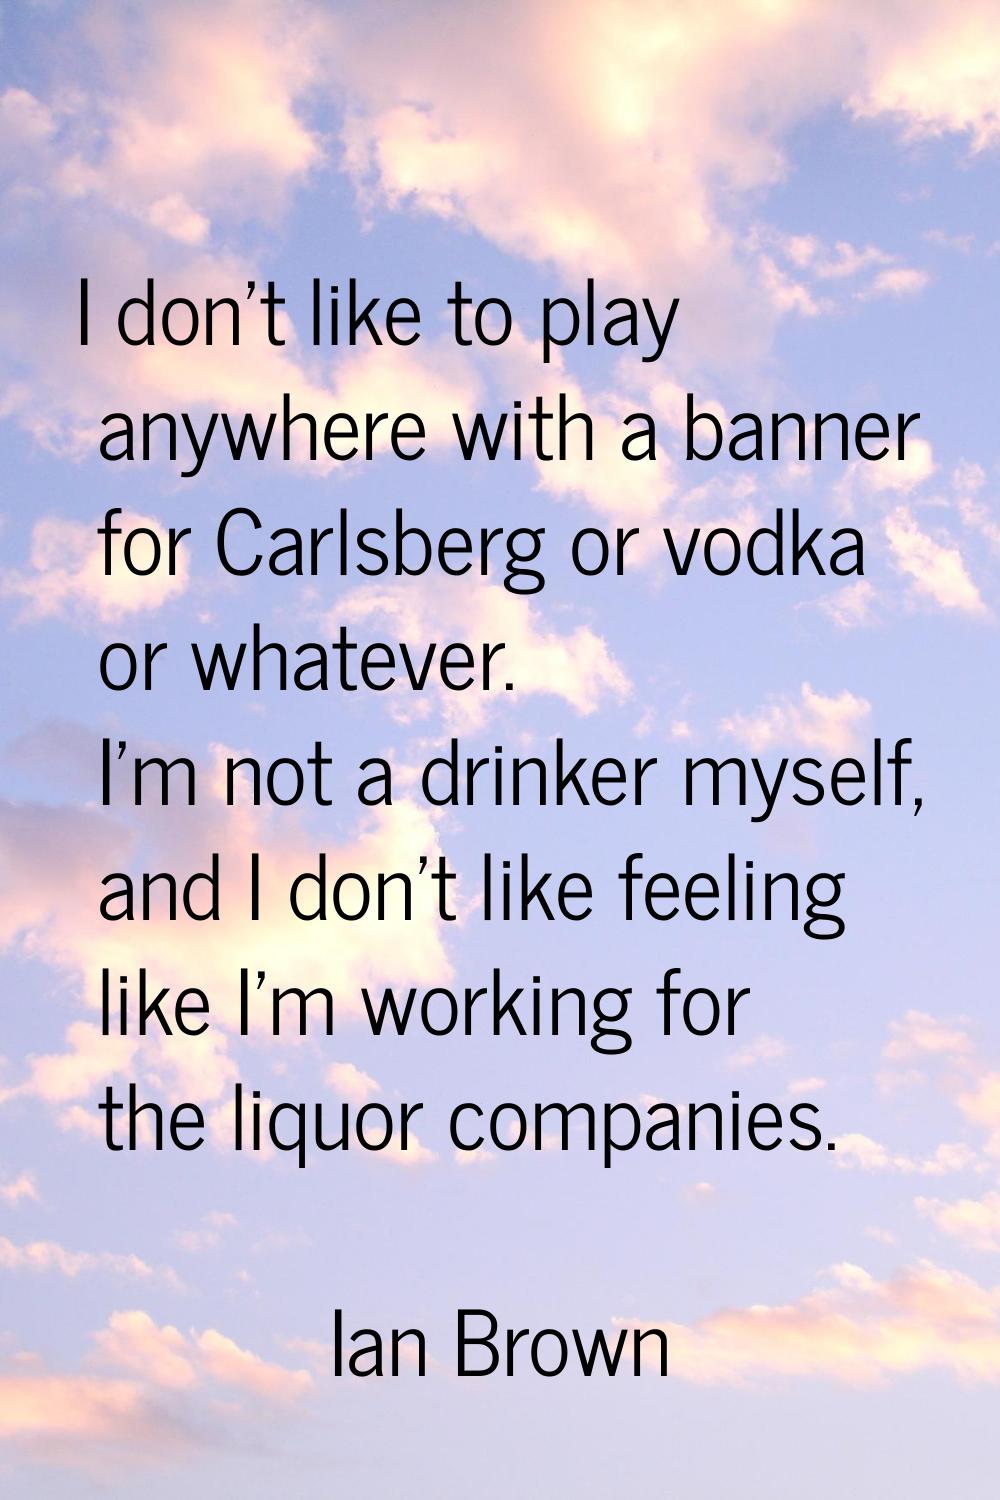 I don't like to play anywhere with a banner for Carlsberg or vodka or whatever. I'm not a drinker m